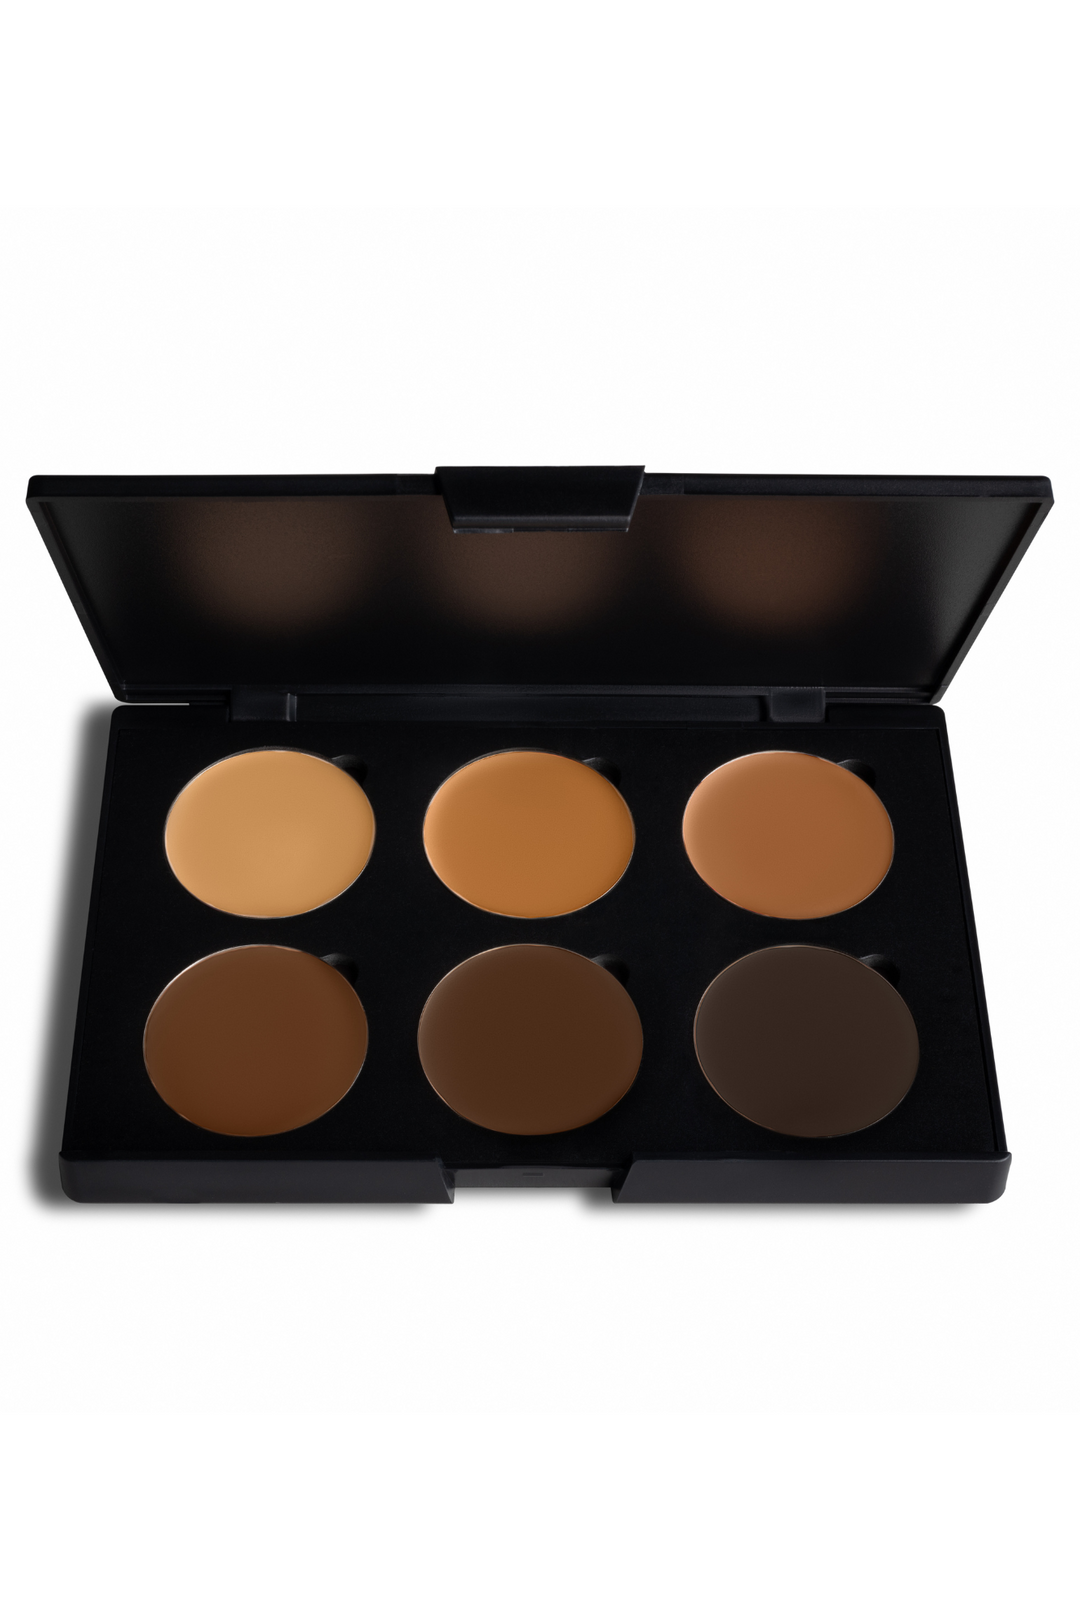 professional makeup foundation palette for Makeup Collections 